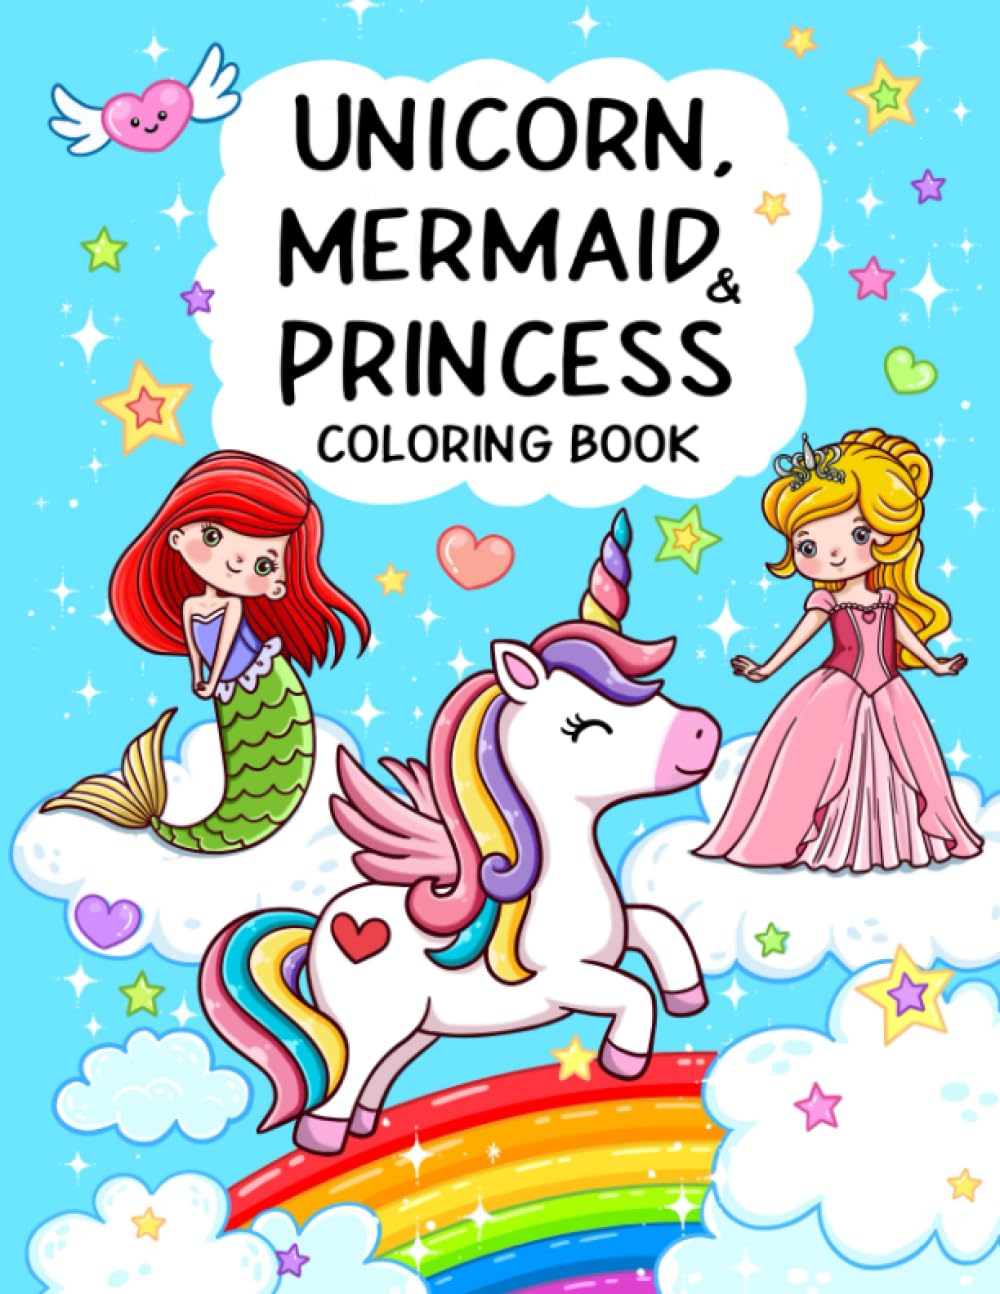 Unicorn, Mermaid & Princess: Cute, Fun and Magical Coloring Book For Kids Ages 4-8